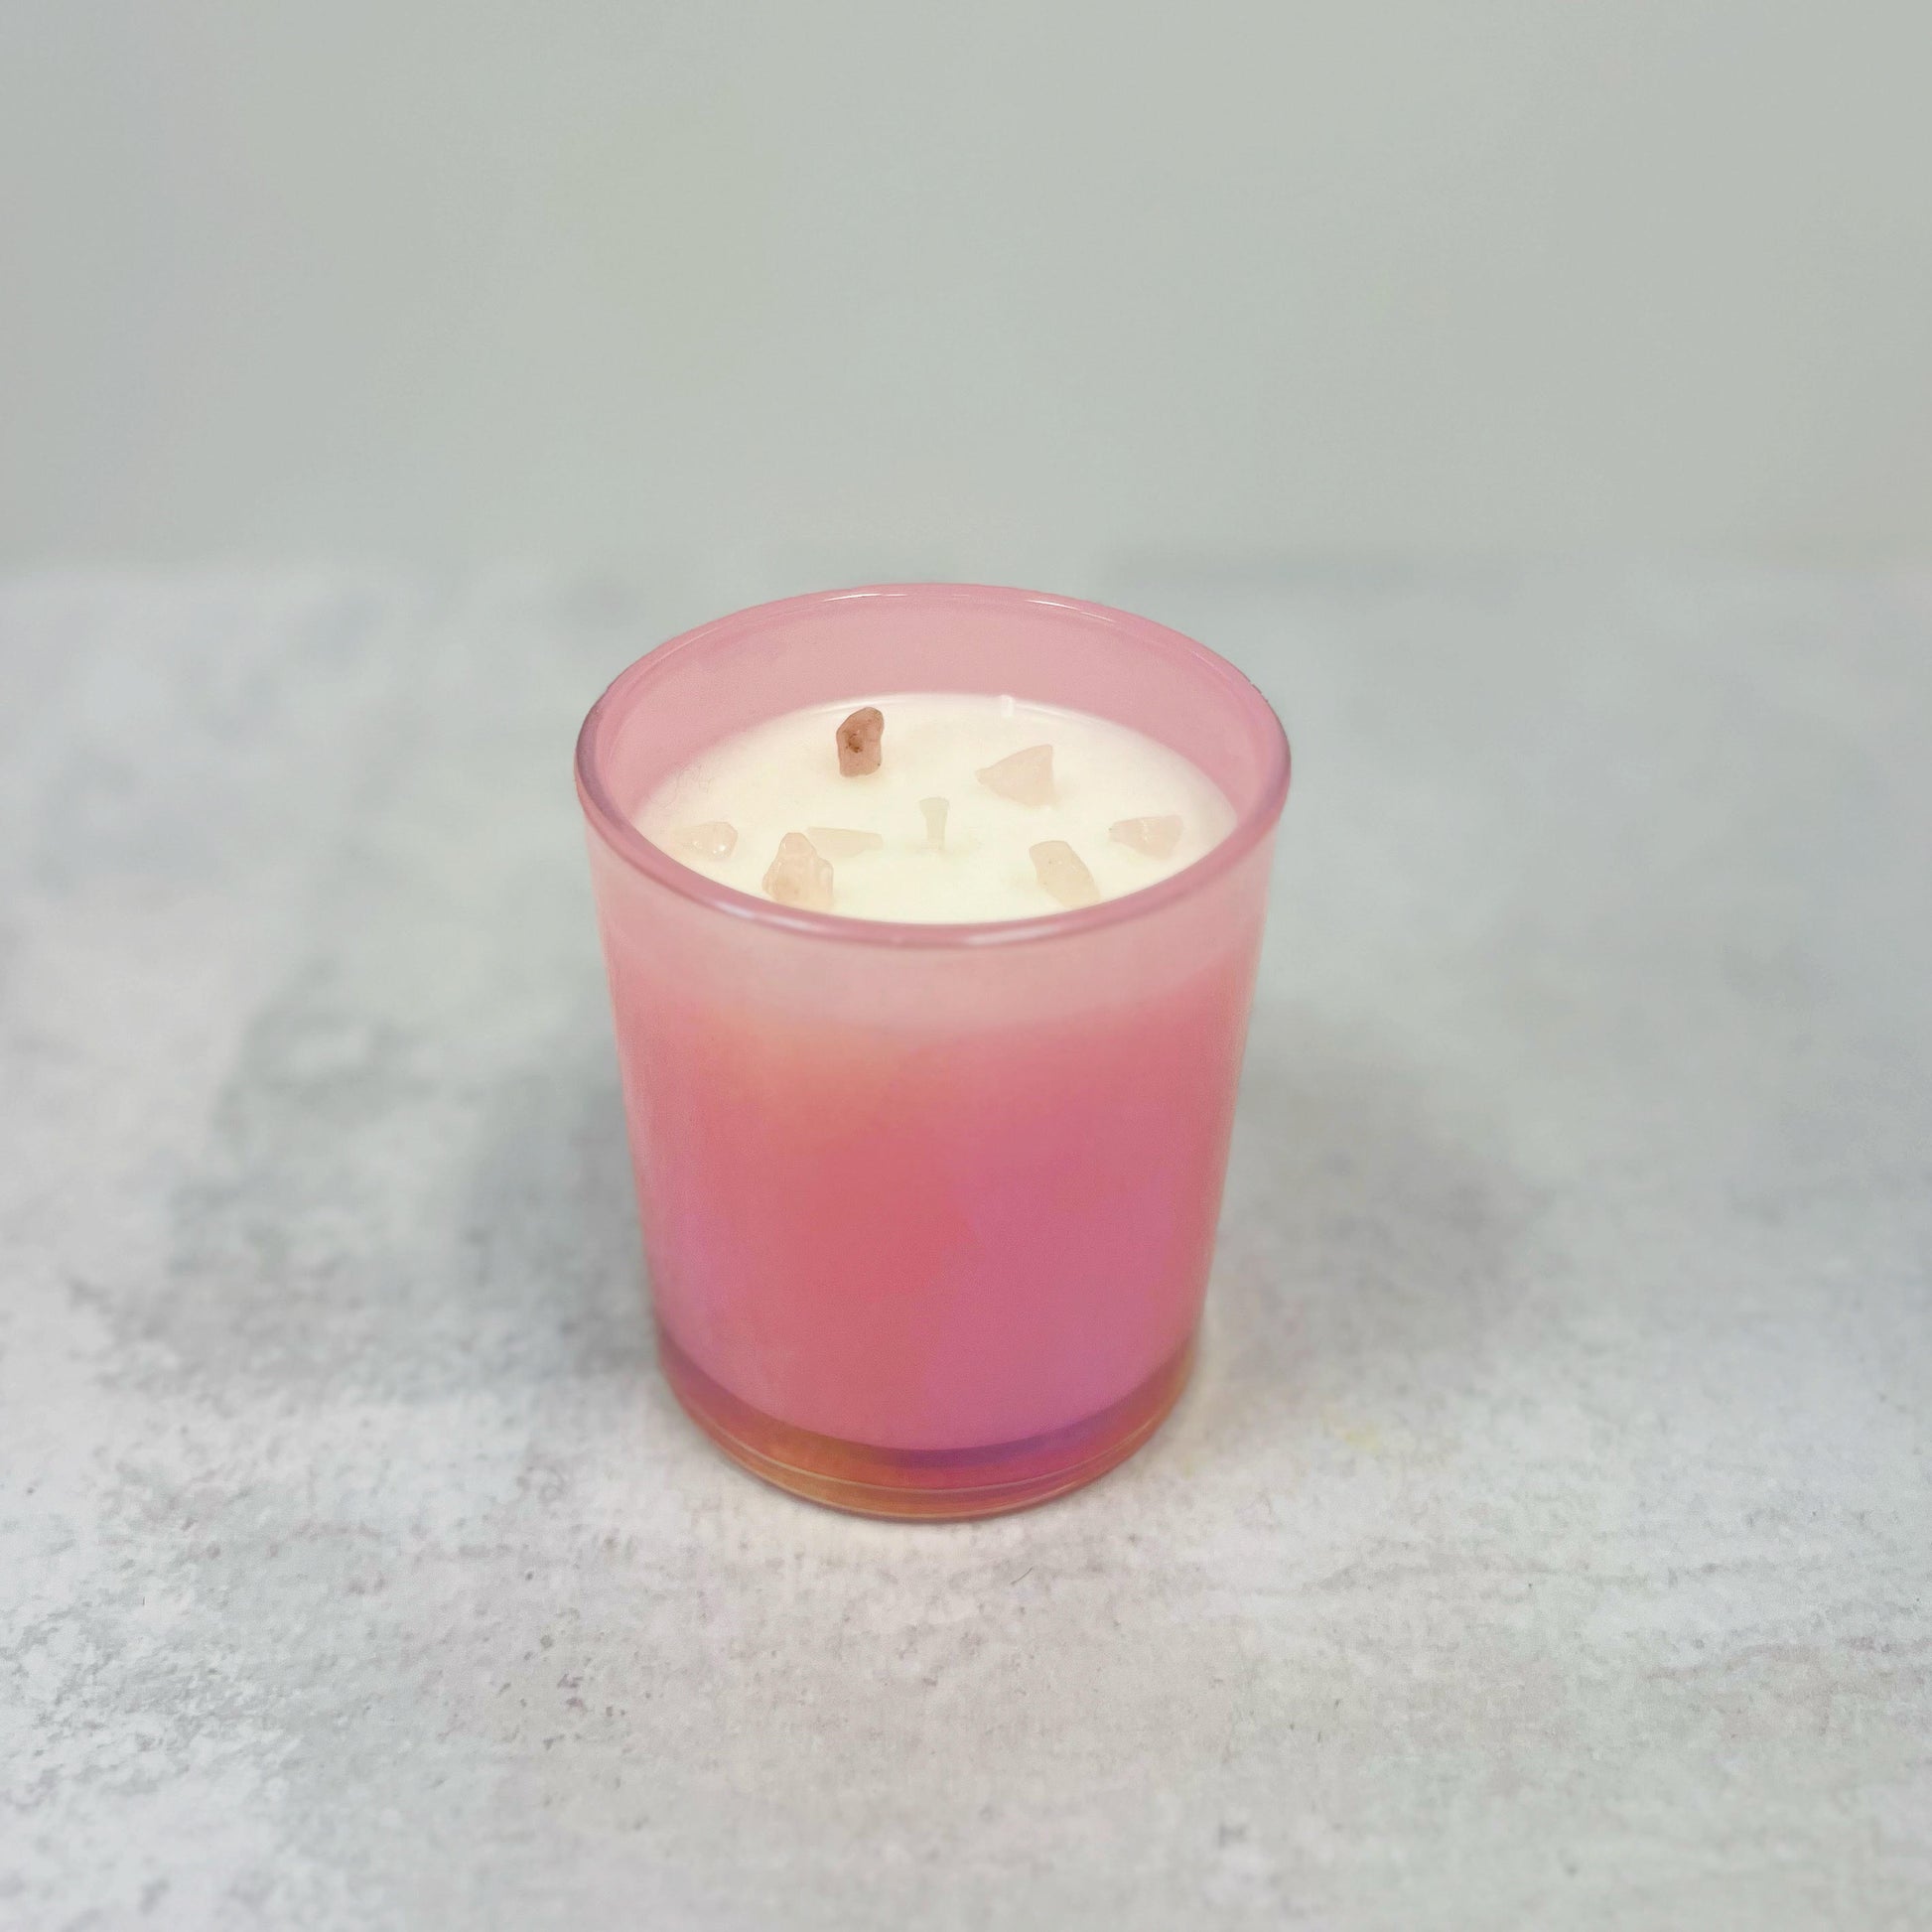 Custom Scented Crystal Candle - The Blush Jar